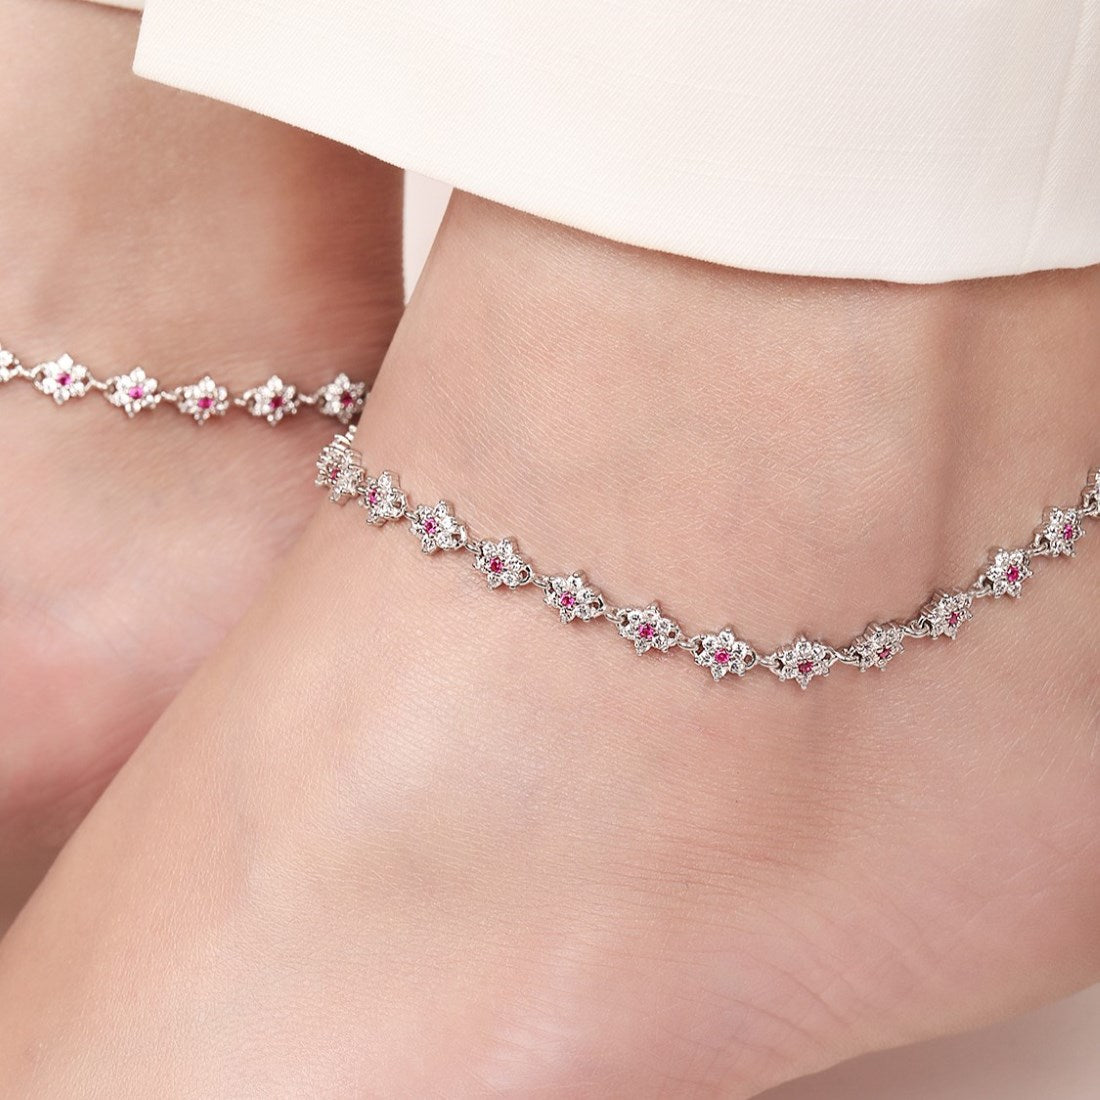 Floral Radiance Rhodium-Plated 925 Sterling Silver Anklet